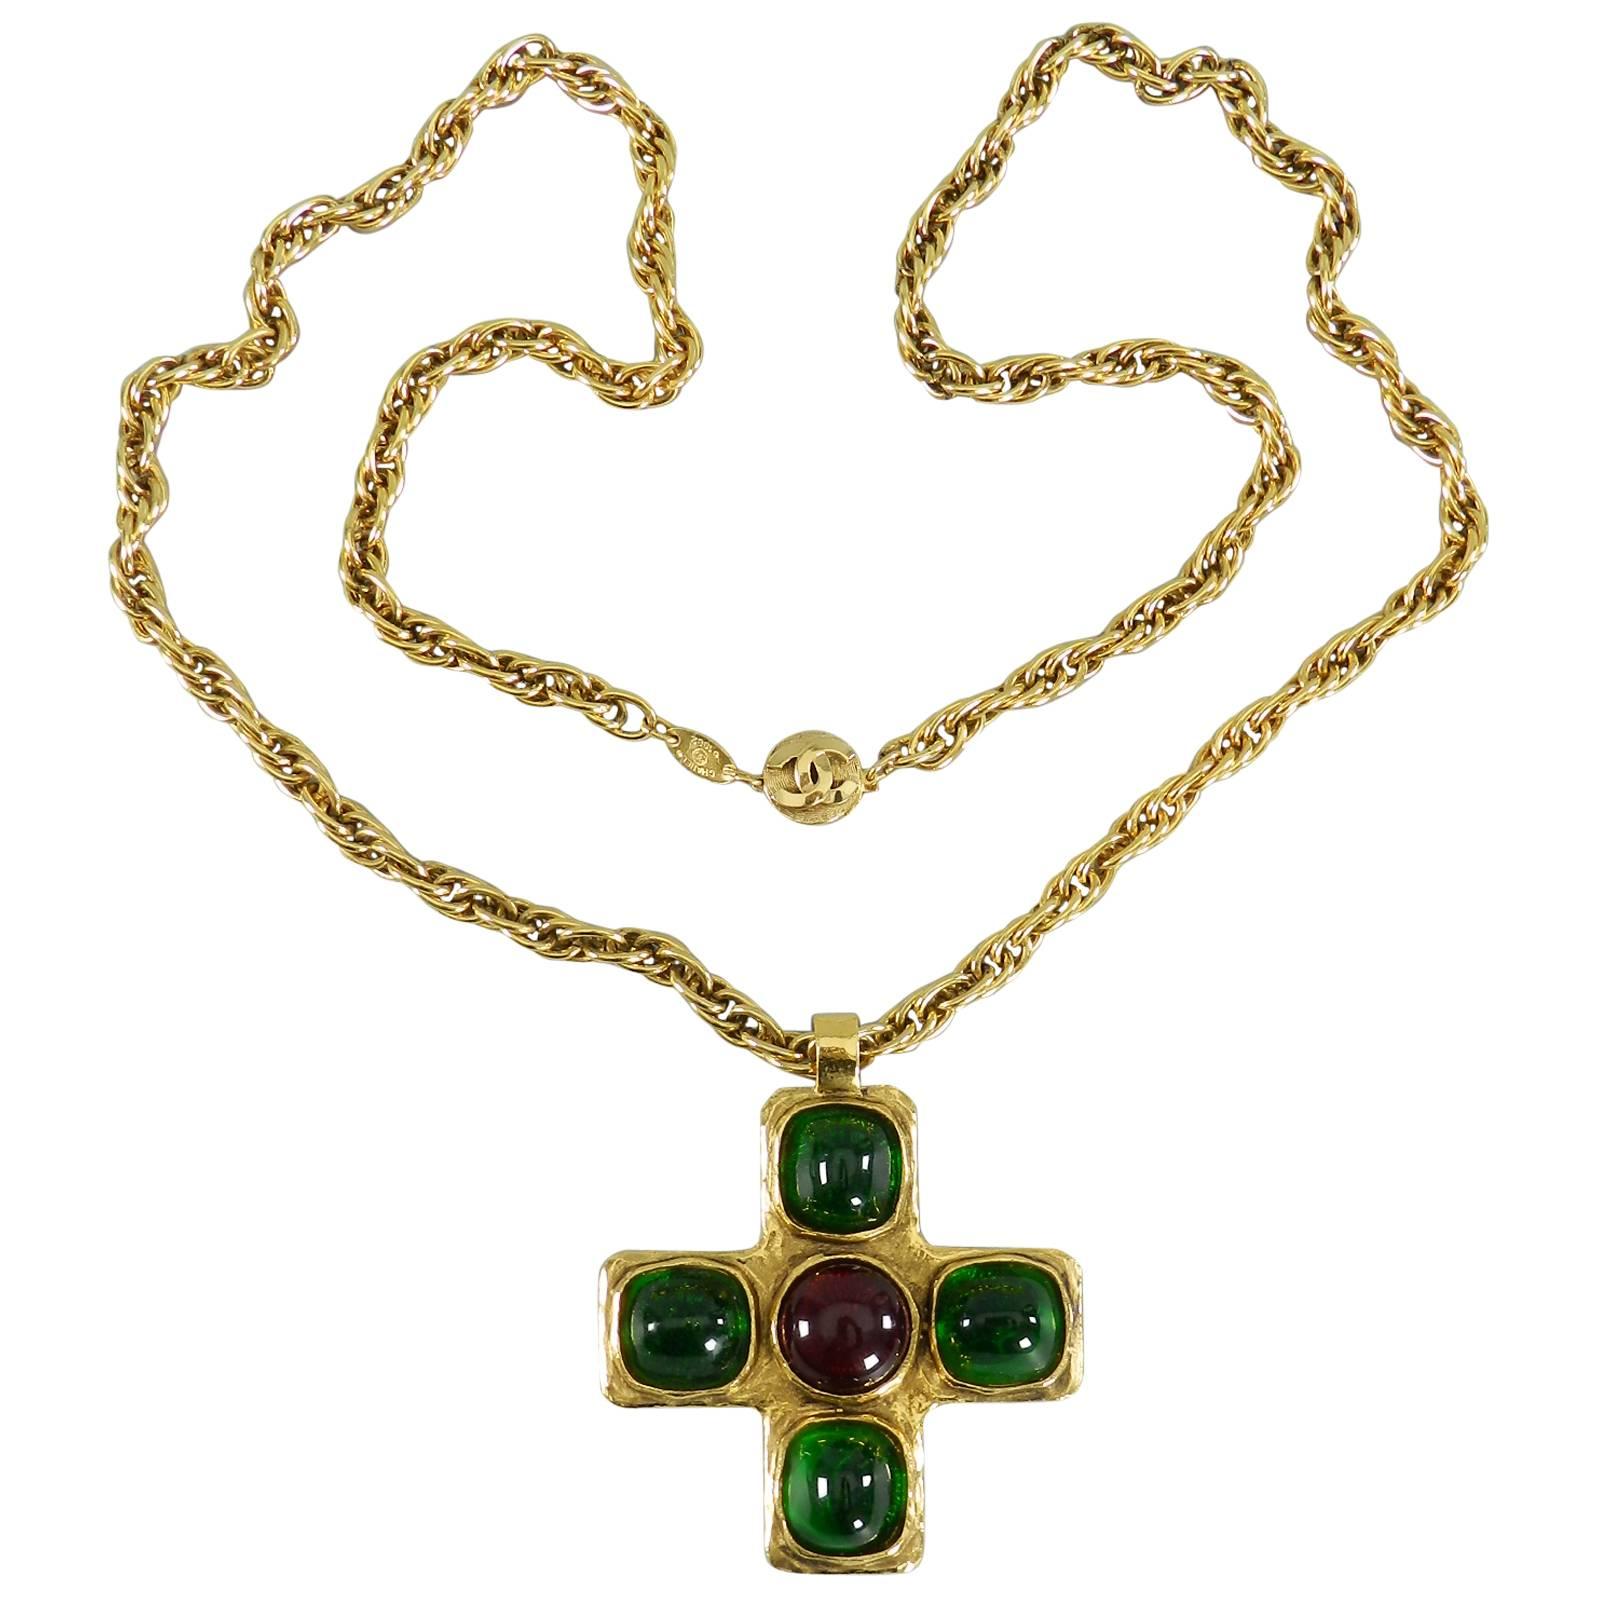 Chanel Vintage 1982 Gripoix Cross Necklace in Box